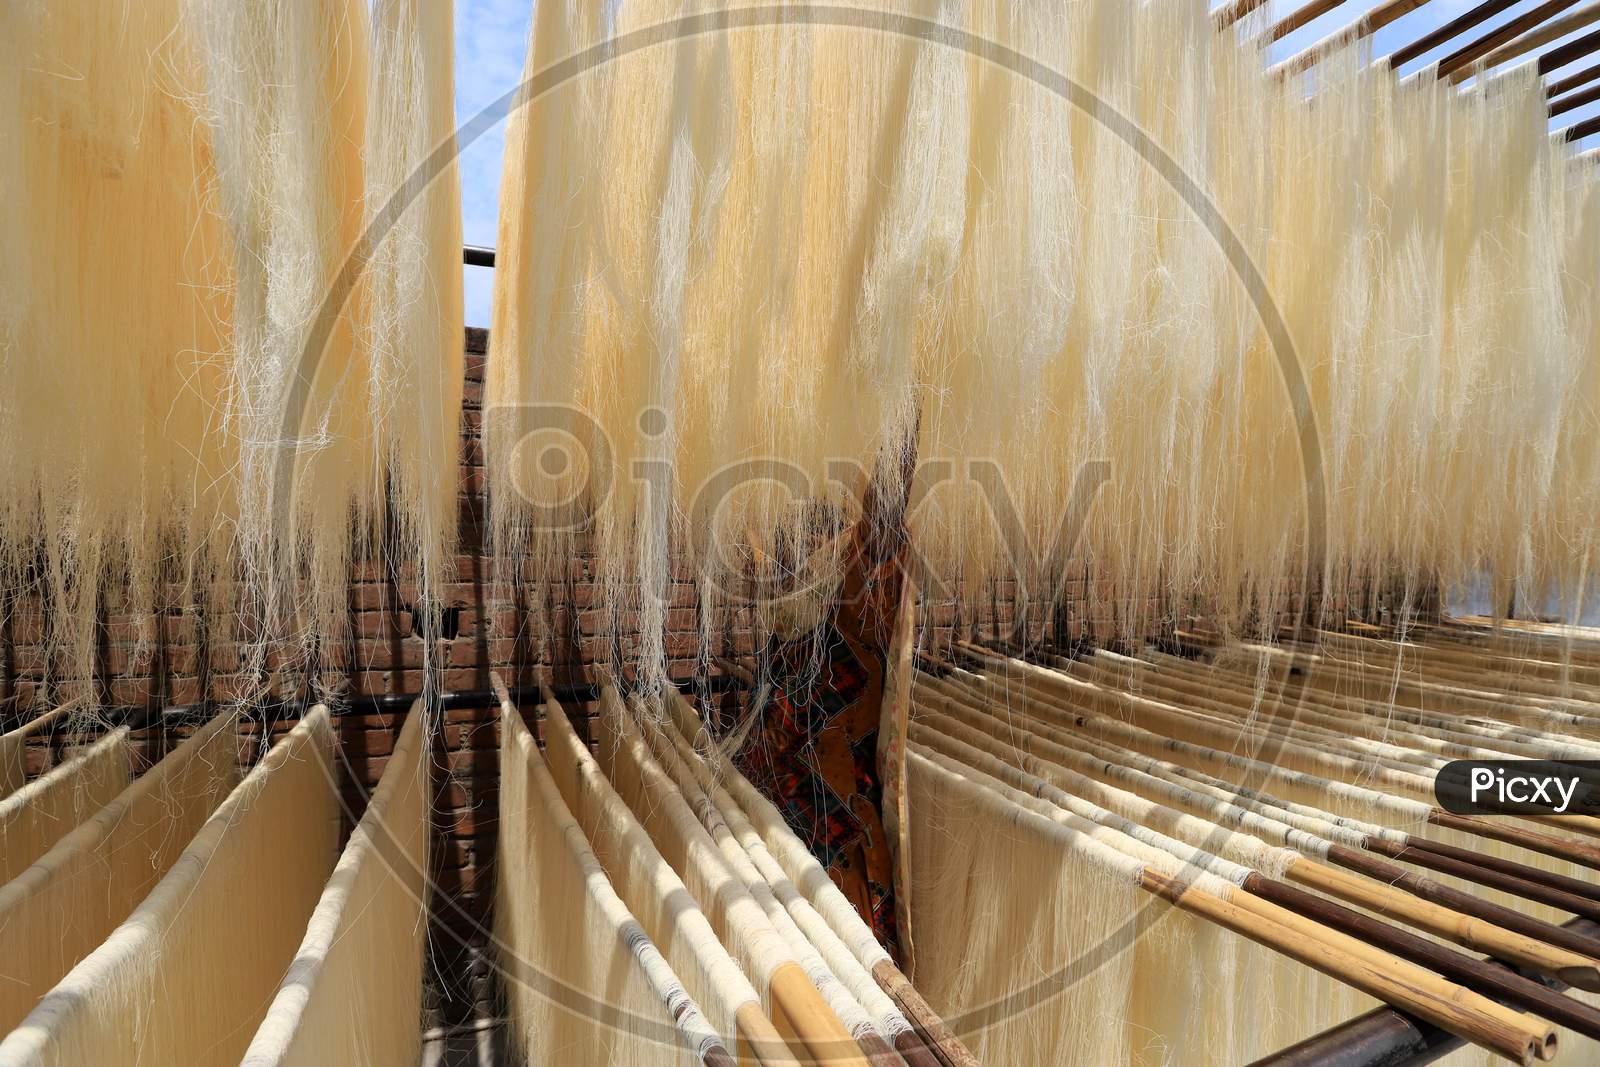 A woman spreads strands of vermicelli, a specialty eaten during the holy month of Ramadan, to dry it at a factory during a nationwide lockdown to slow the spreading of the coronavirus disease (COVID-19), in Prayagraj, April 28, 2020.